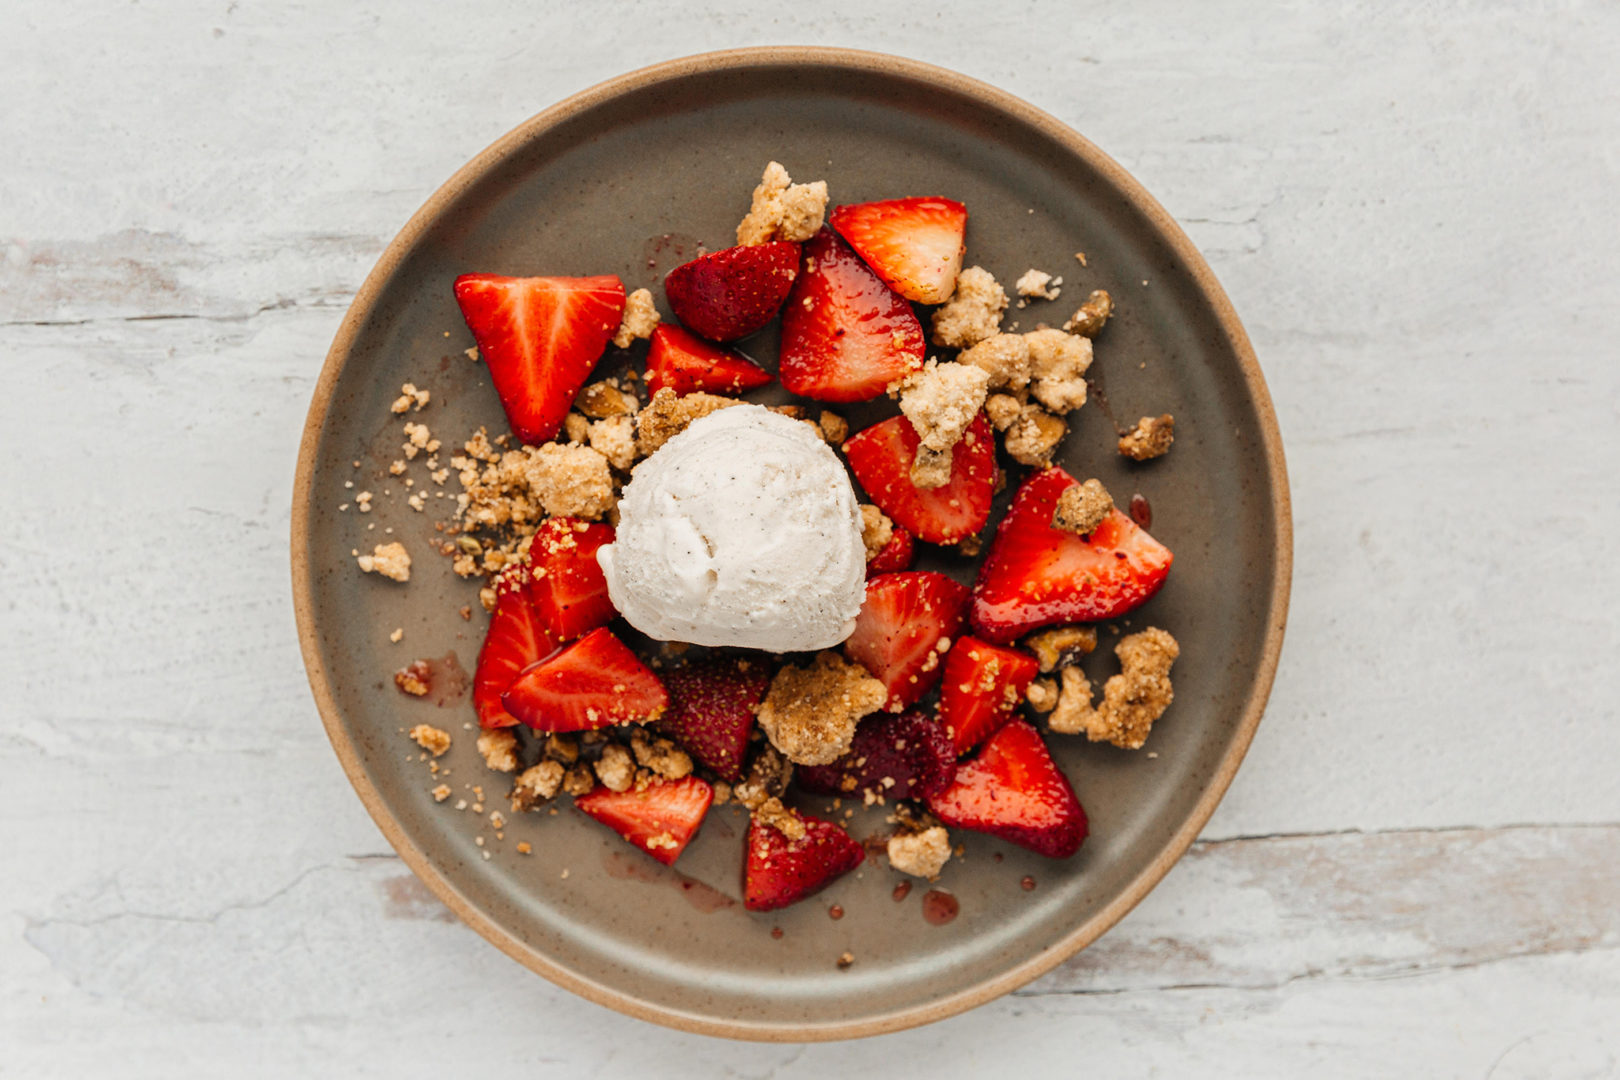 pistachio crumbles with strawberries and ice cream